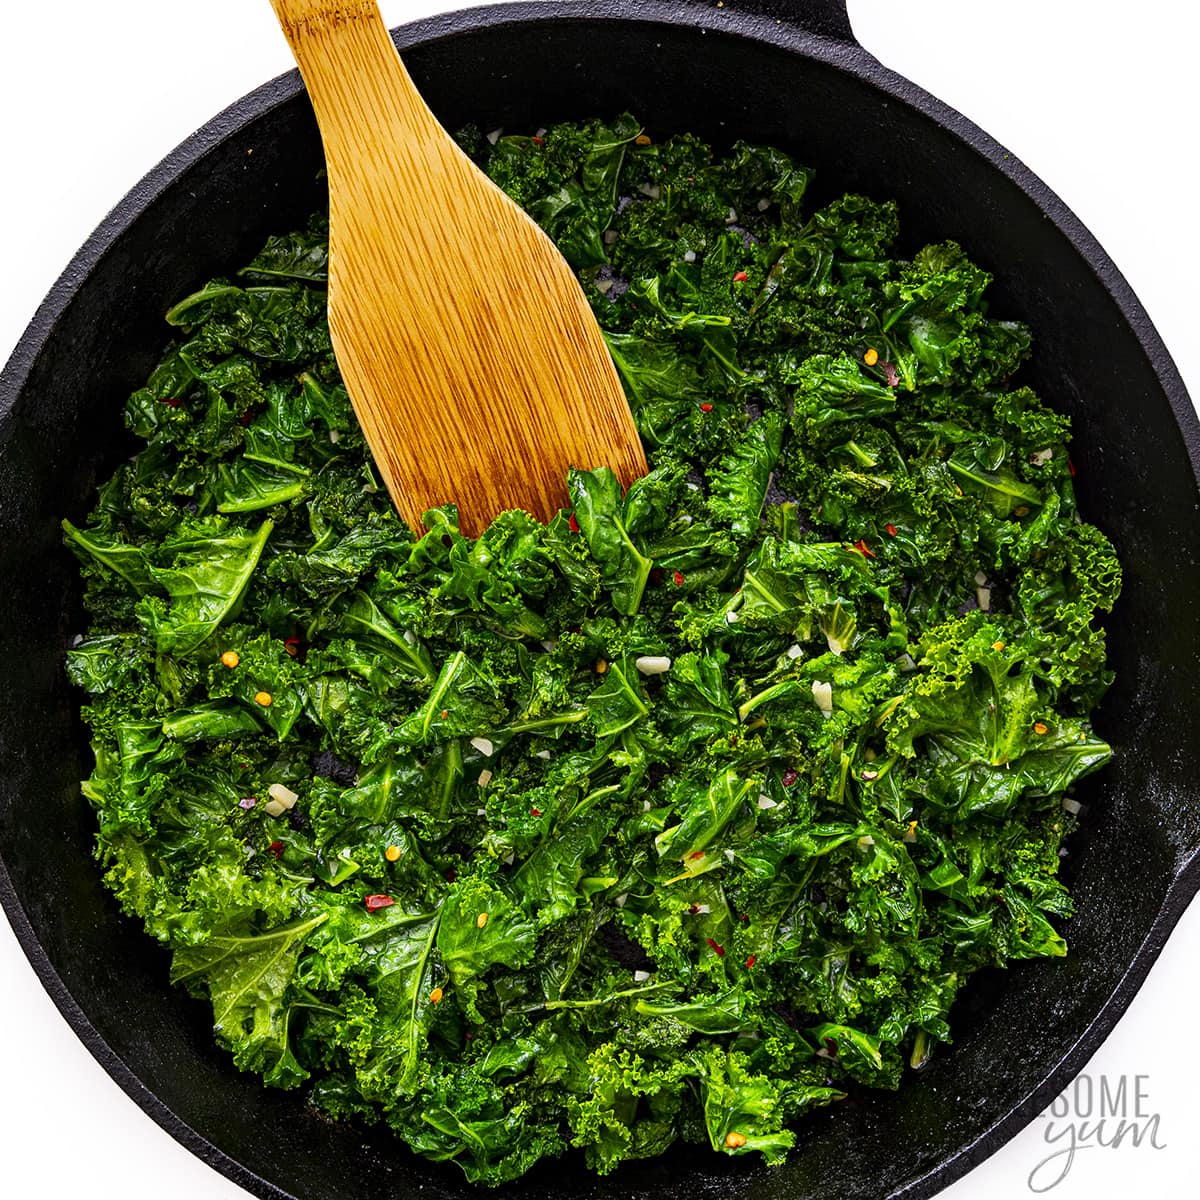 Finished sauteed kale in a skillet.